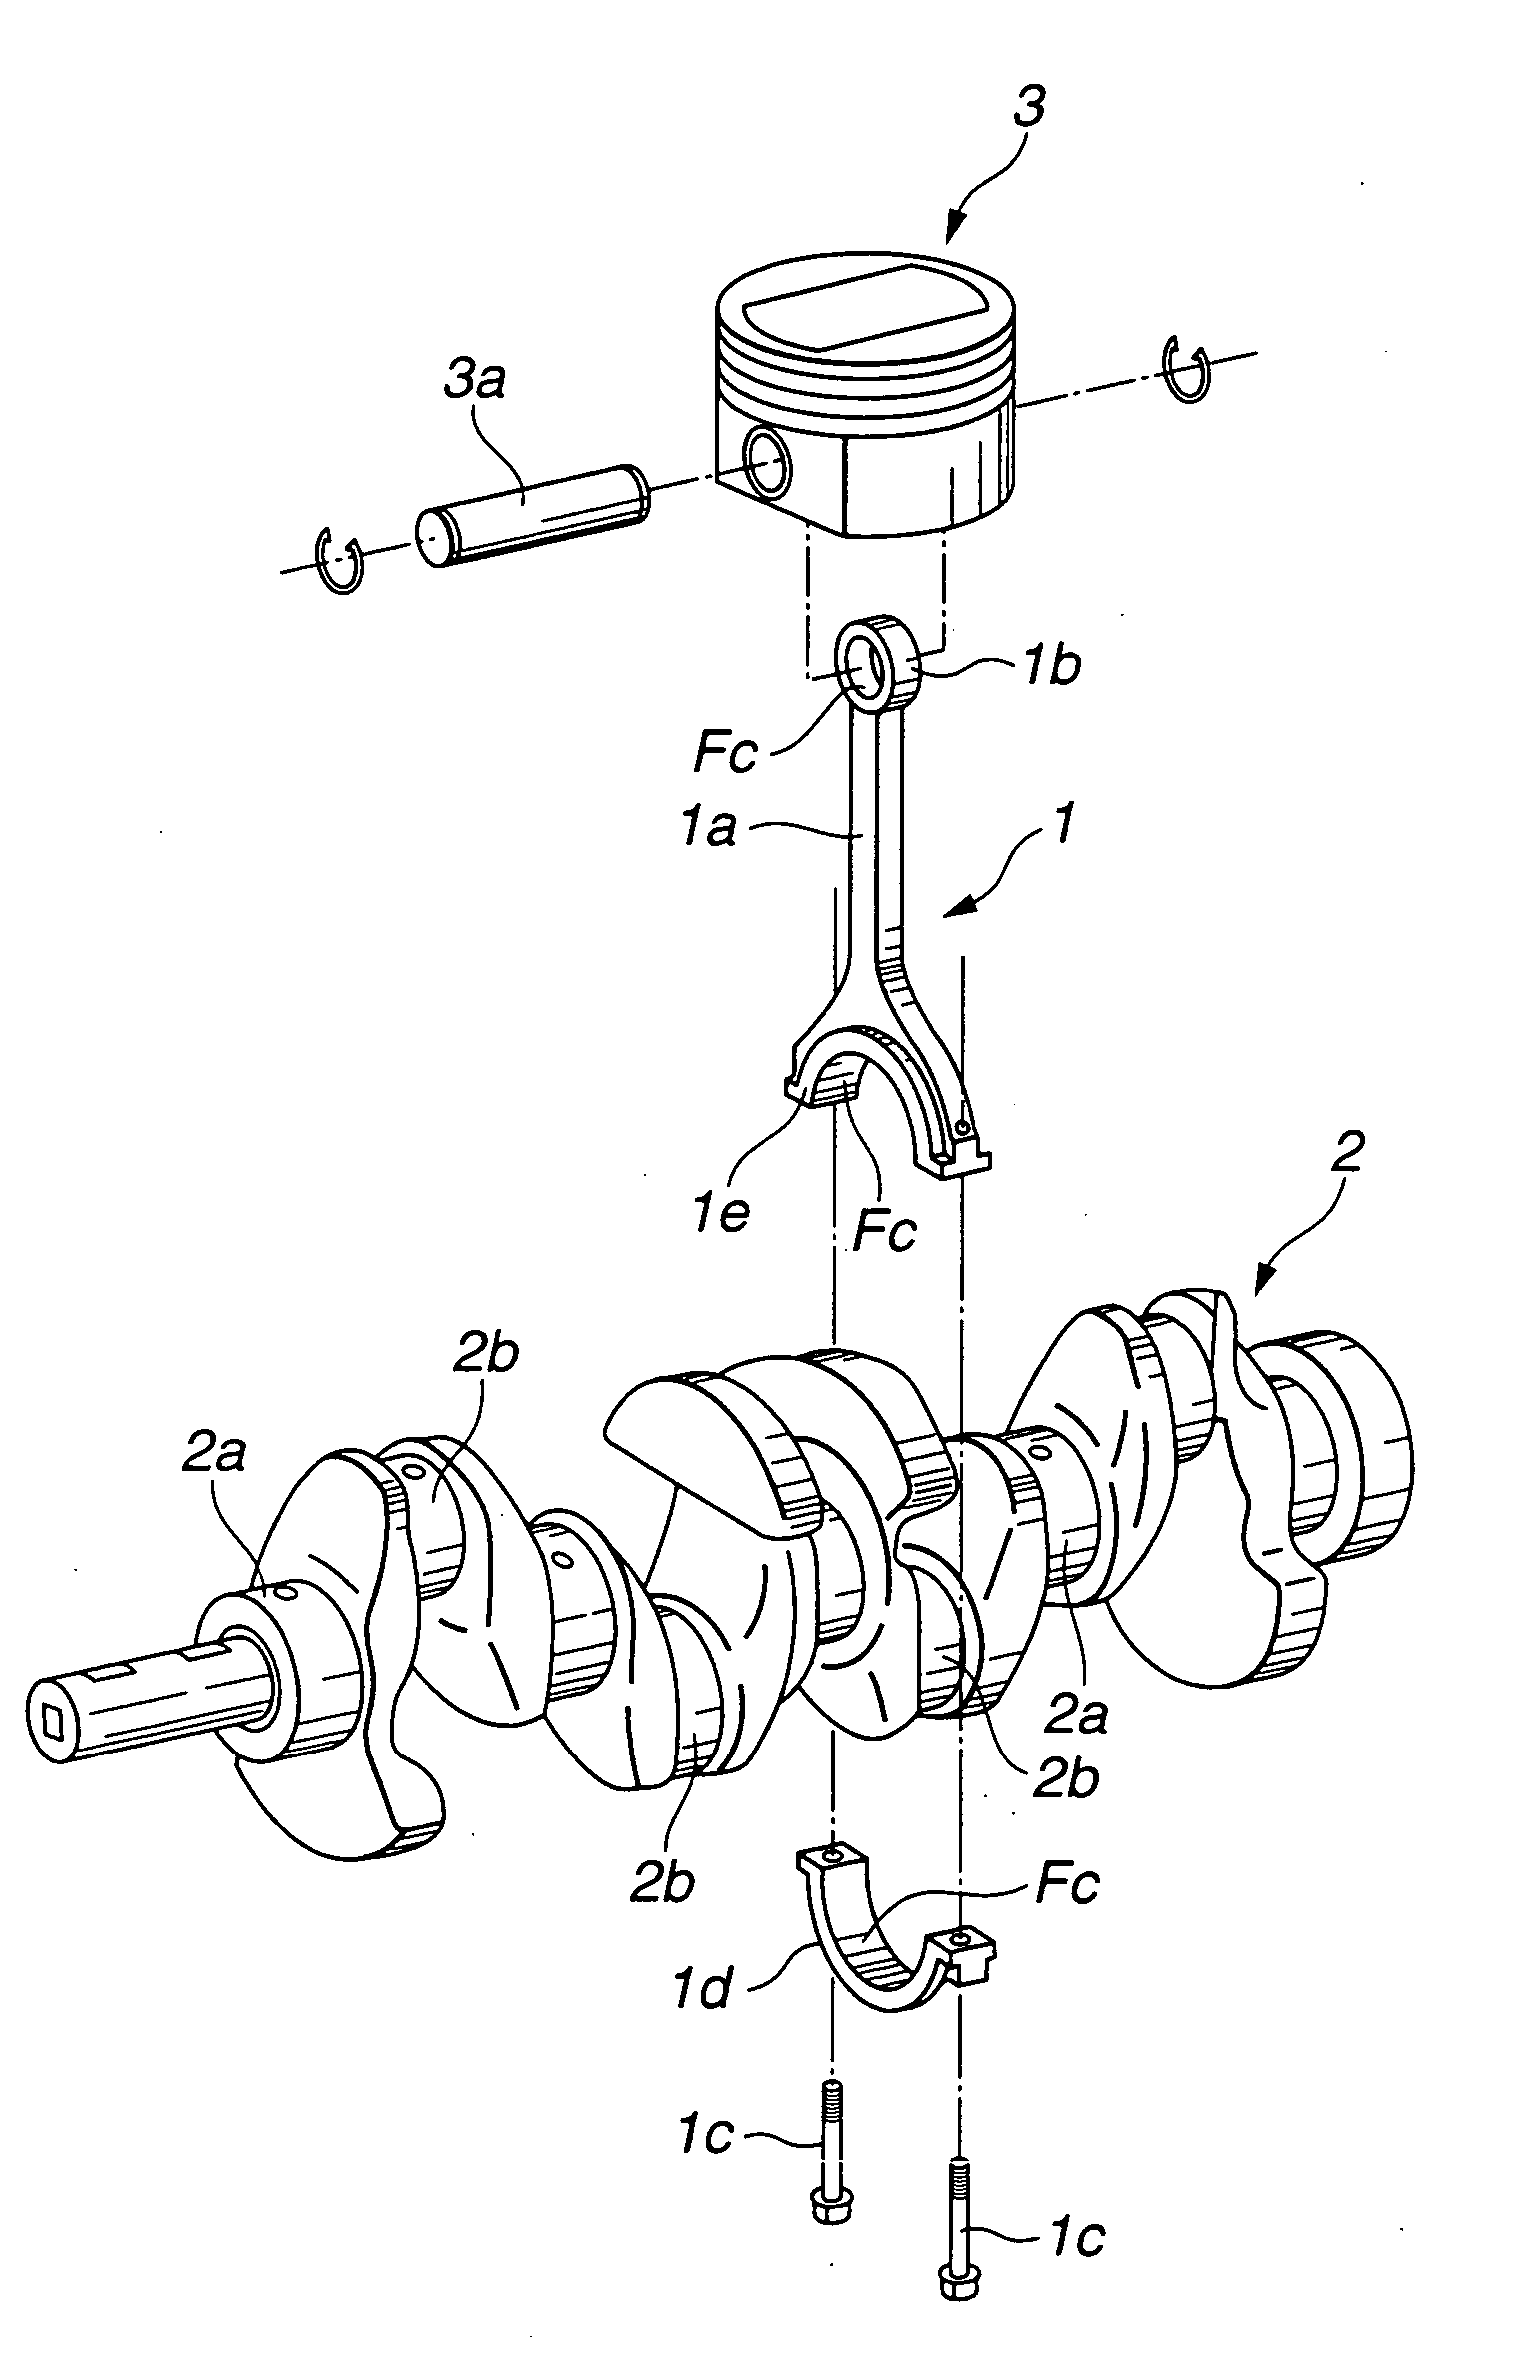 Structure for connecting piston to crankshaft